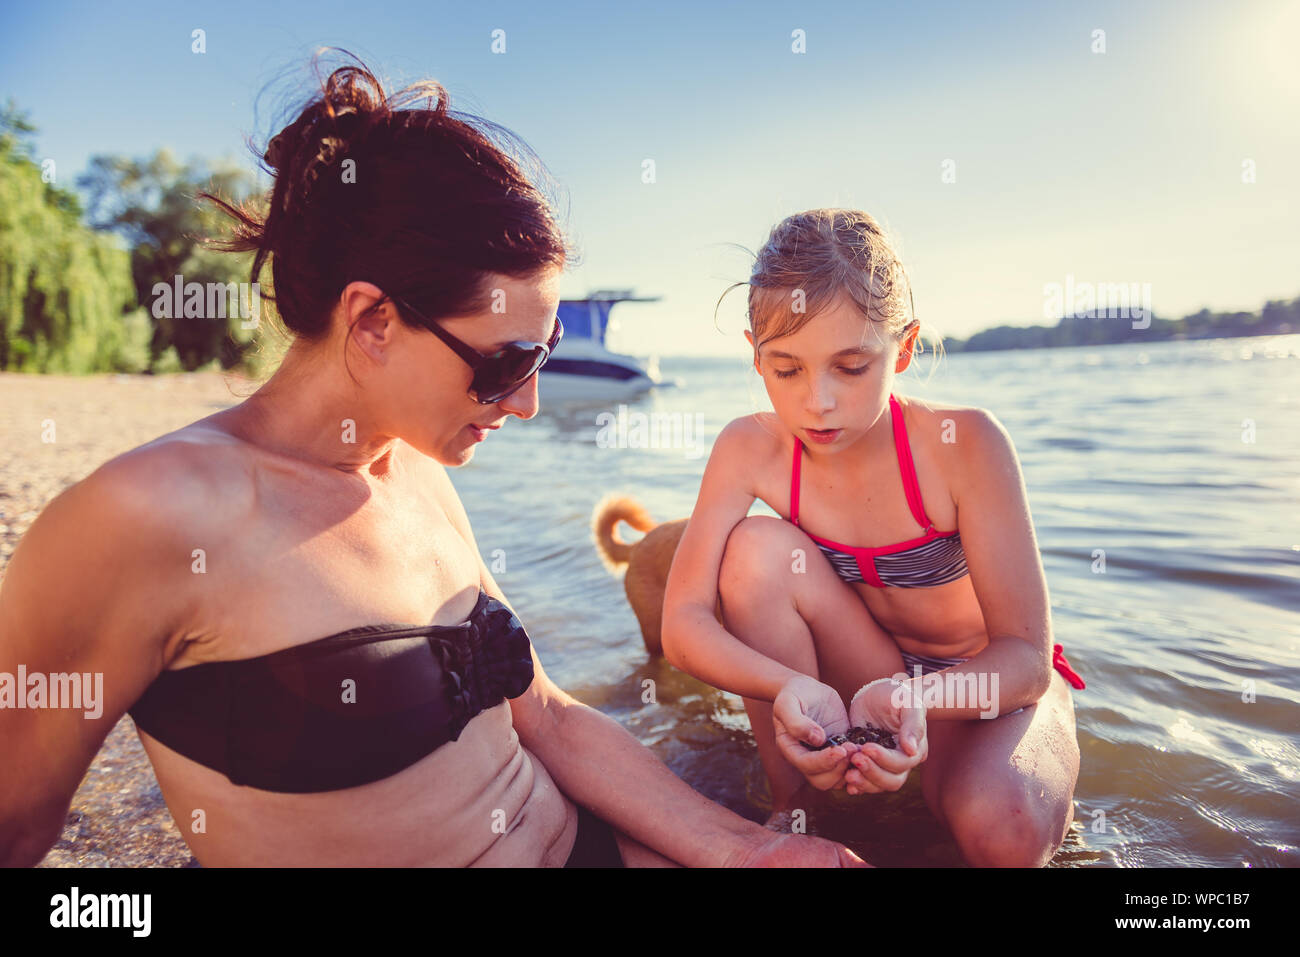 Mother, daughter and small yellow dog enjoying on the beach Stock Photo